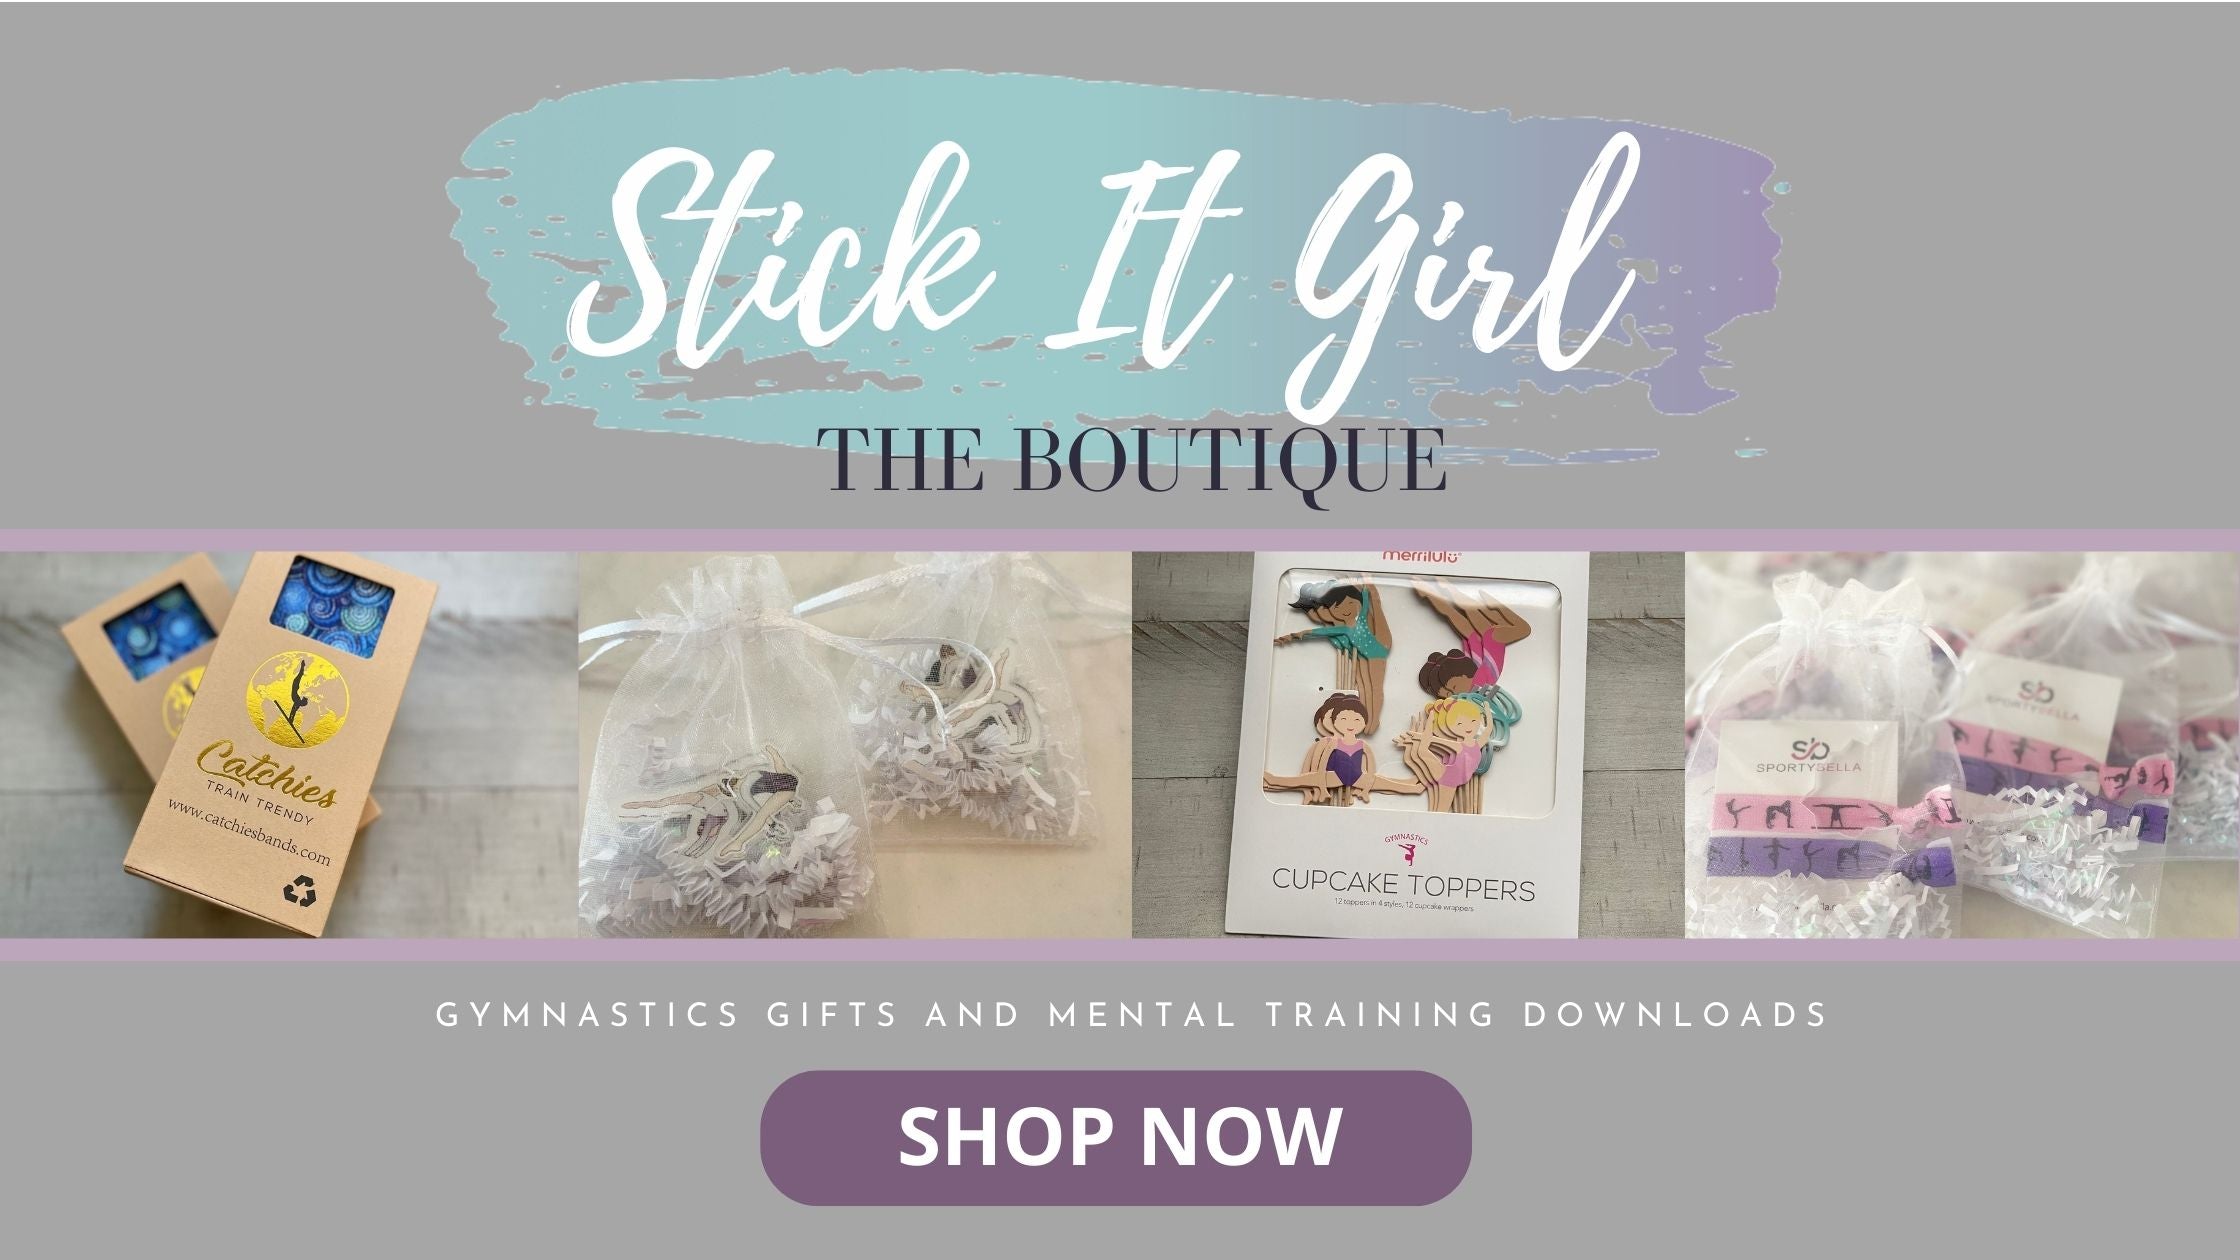 Shop gymnastics gifts and accessories at the Stick It Girl Boutique